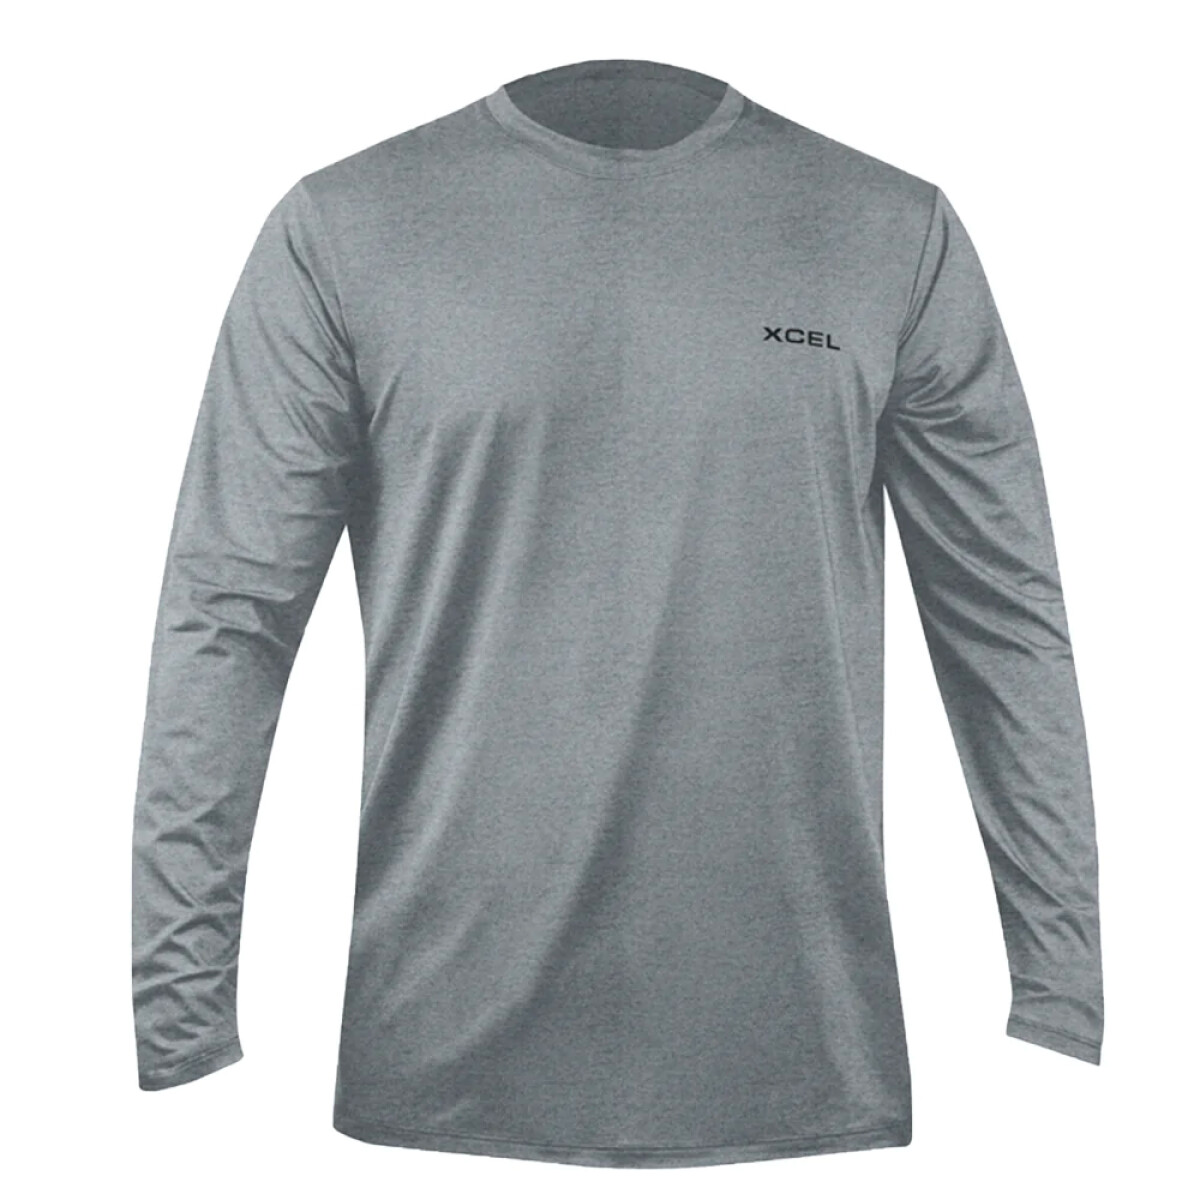 LYCRA MENS PREMIUM STRETCH RELAXED FIT LONG SLEEVE UV 